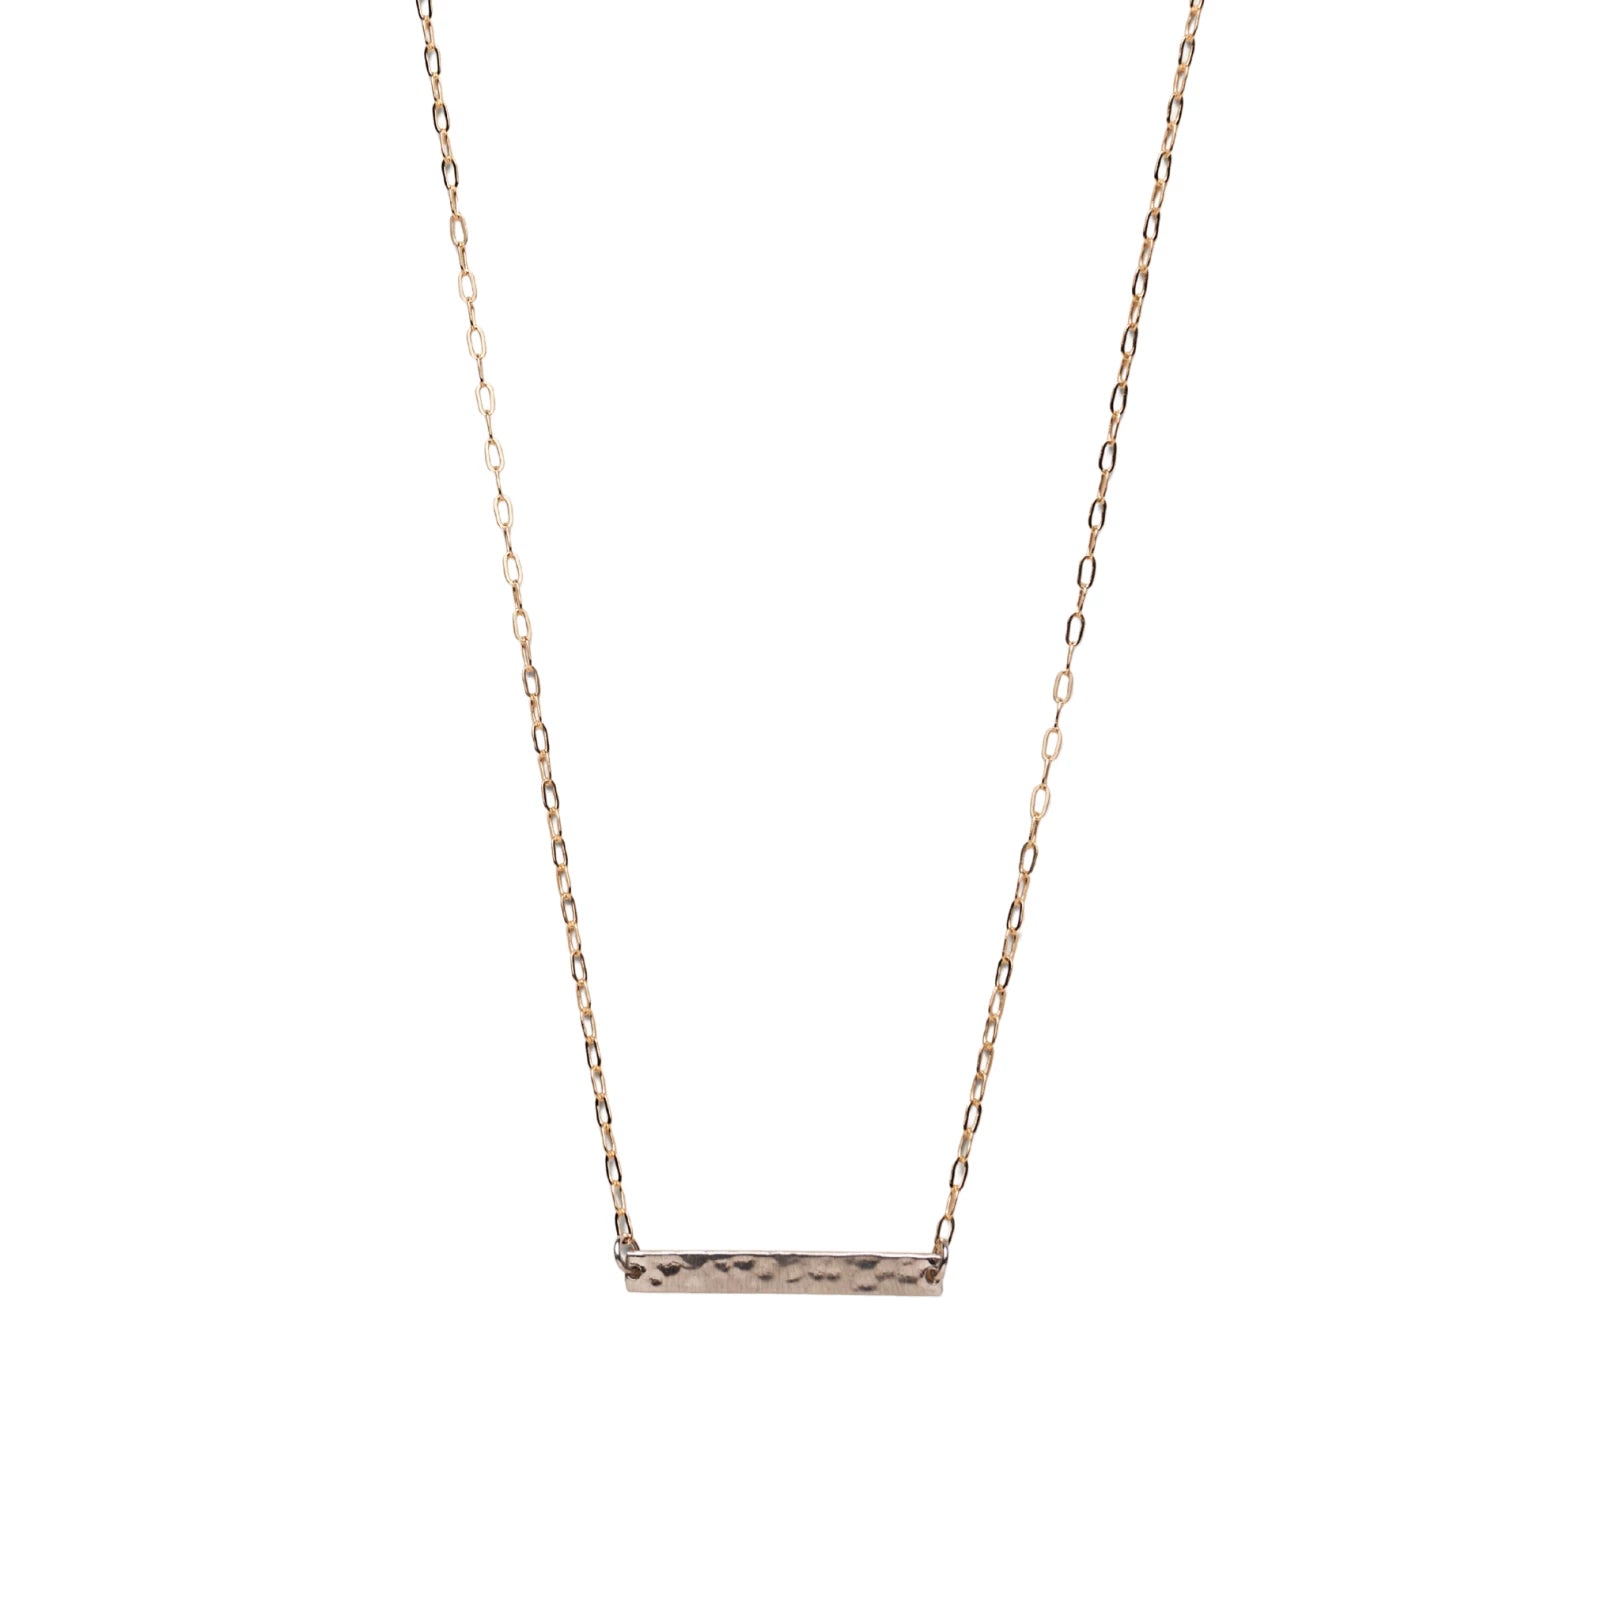 Hammered Bar Necklace in Mixed Metals Sterling Silver/ Gold Filled